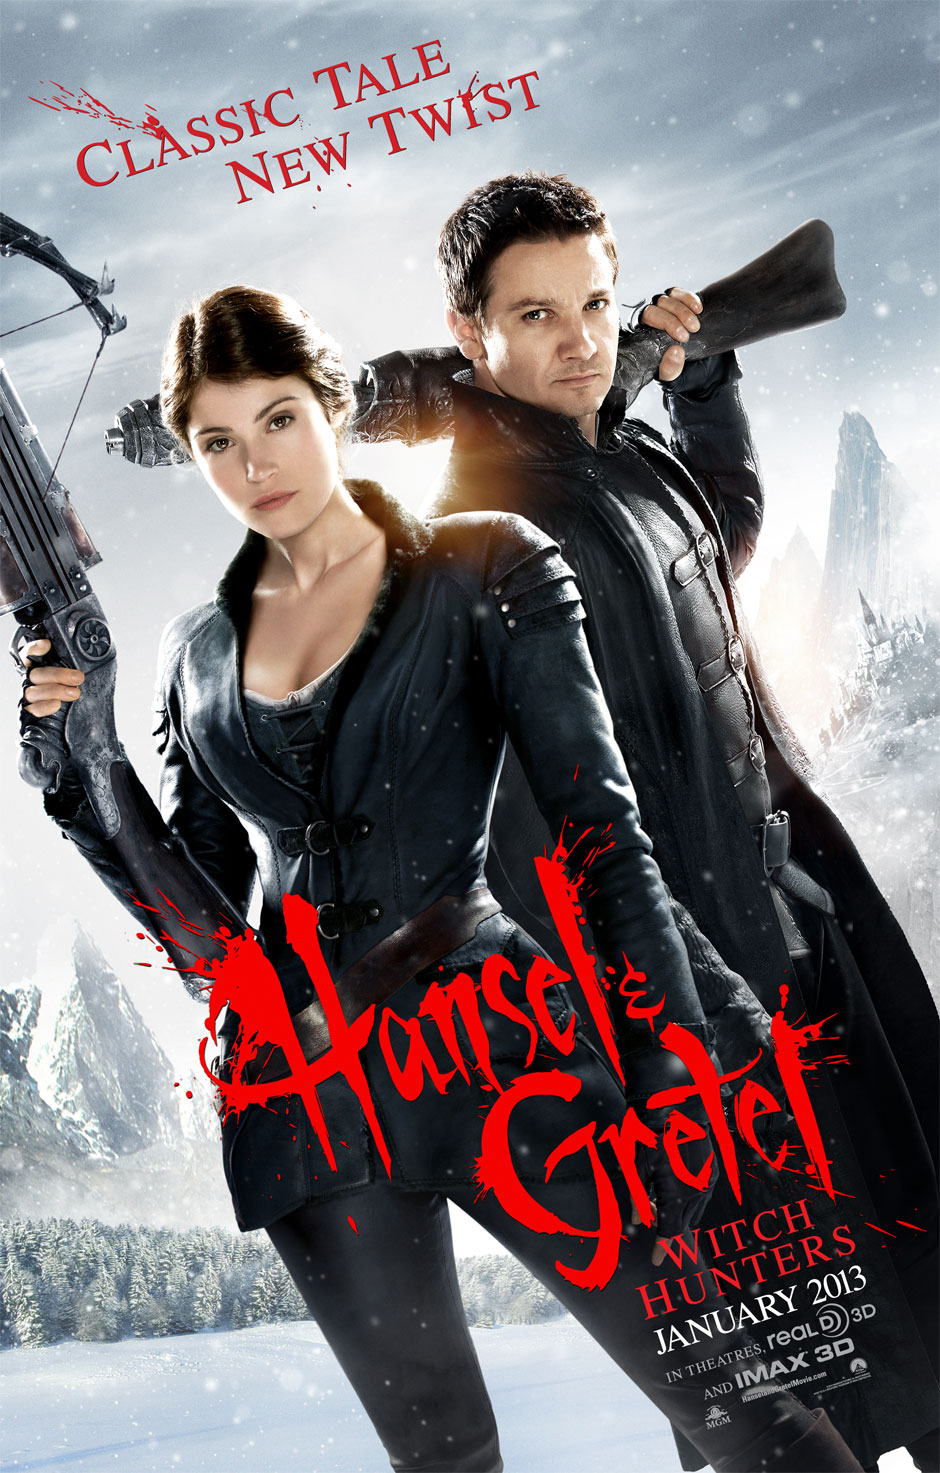 Hansel-and-Gretel-Witch-Hunters-2012-Movie-Poster.jpg